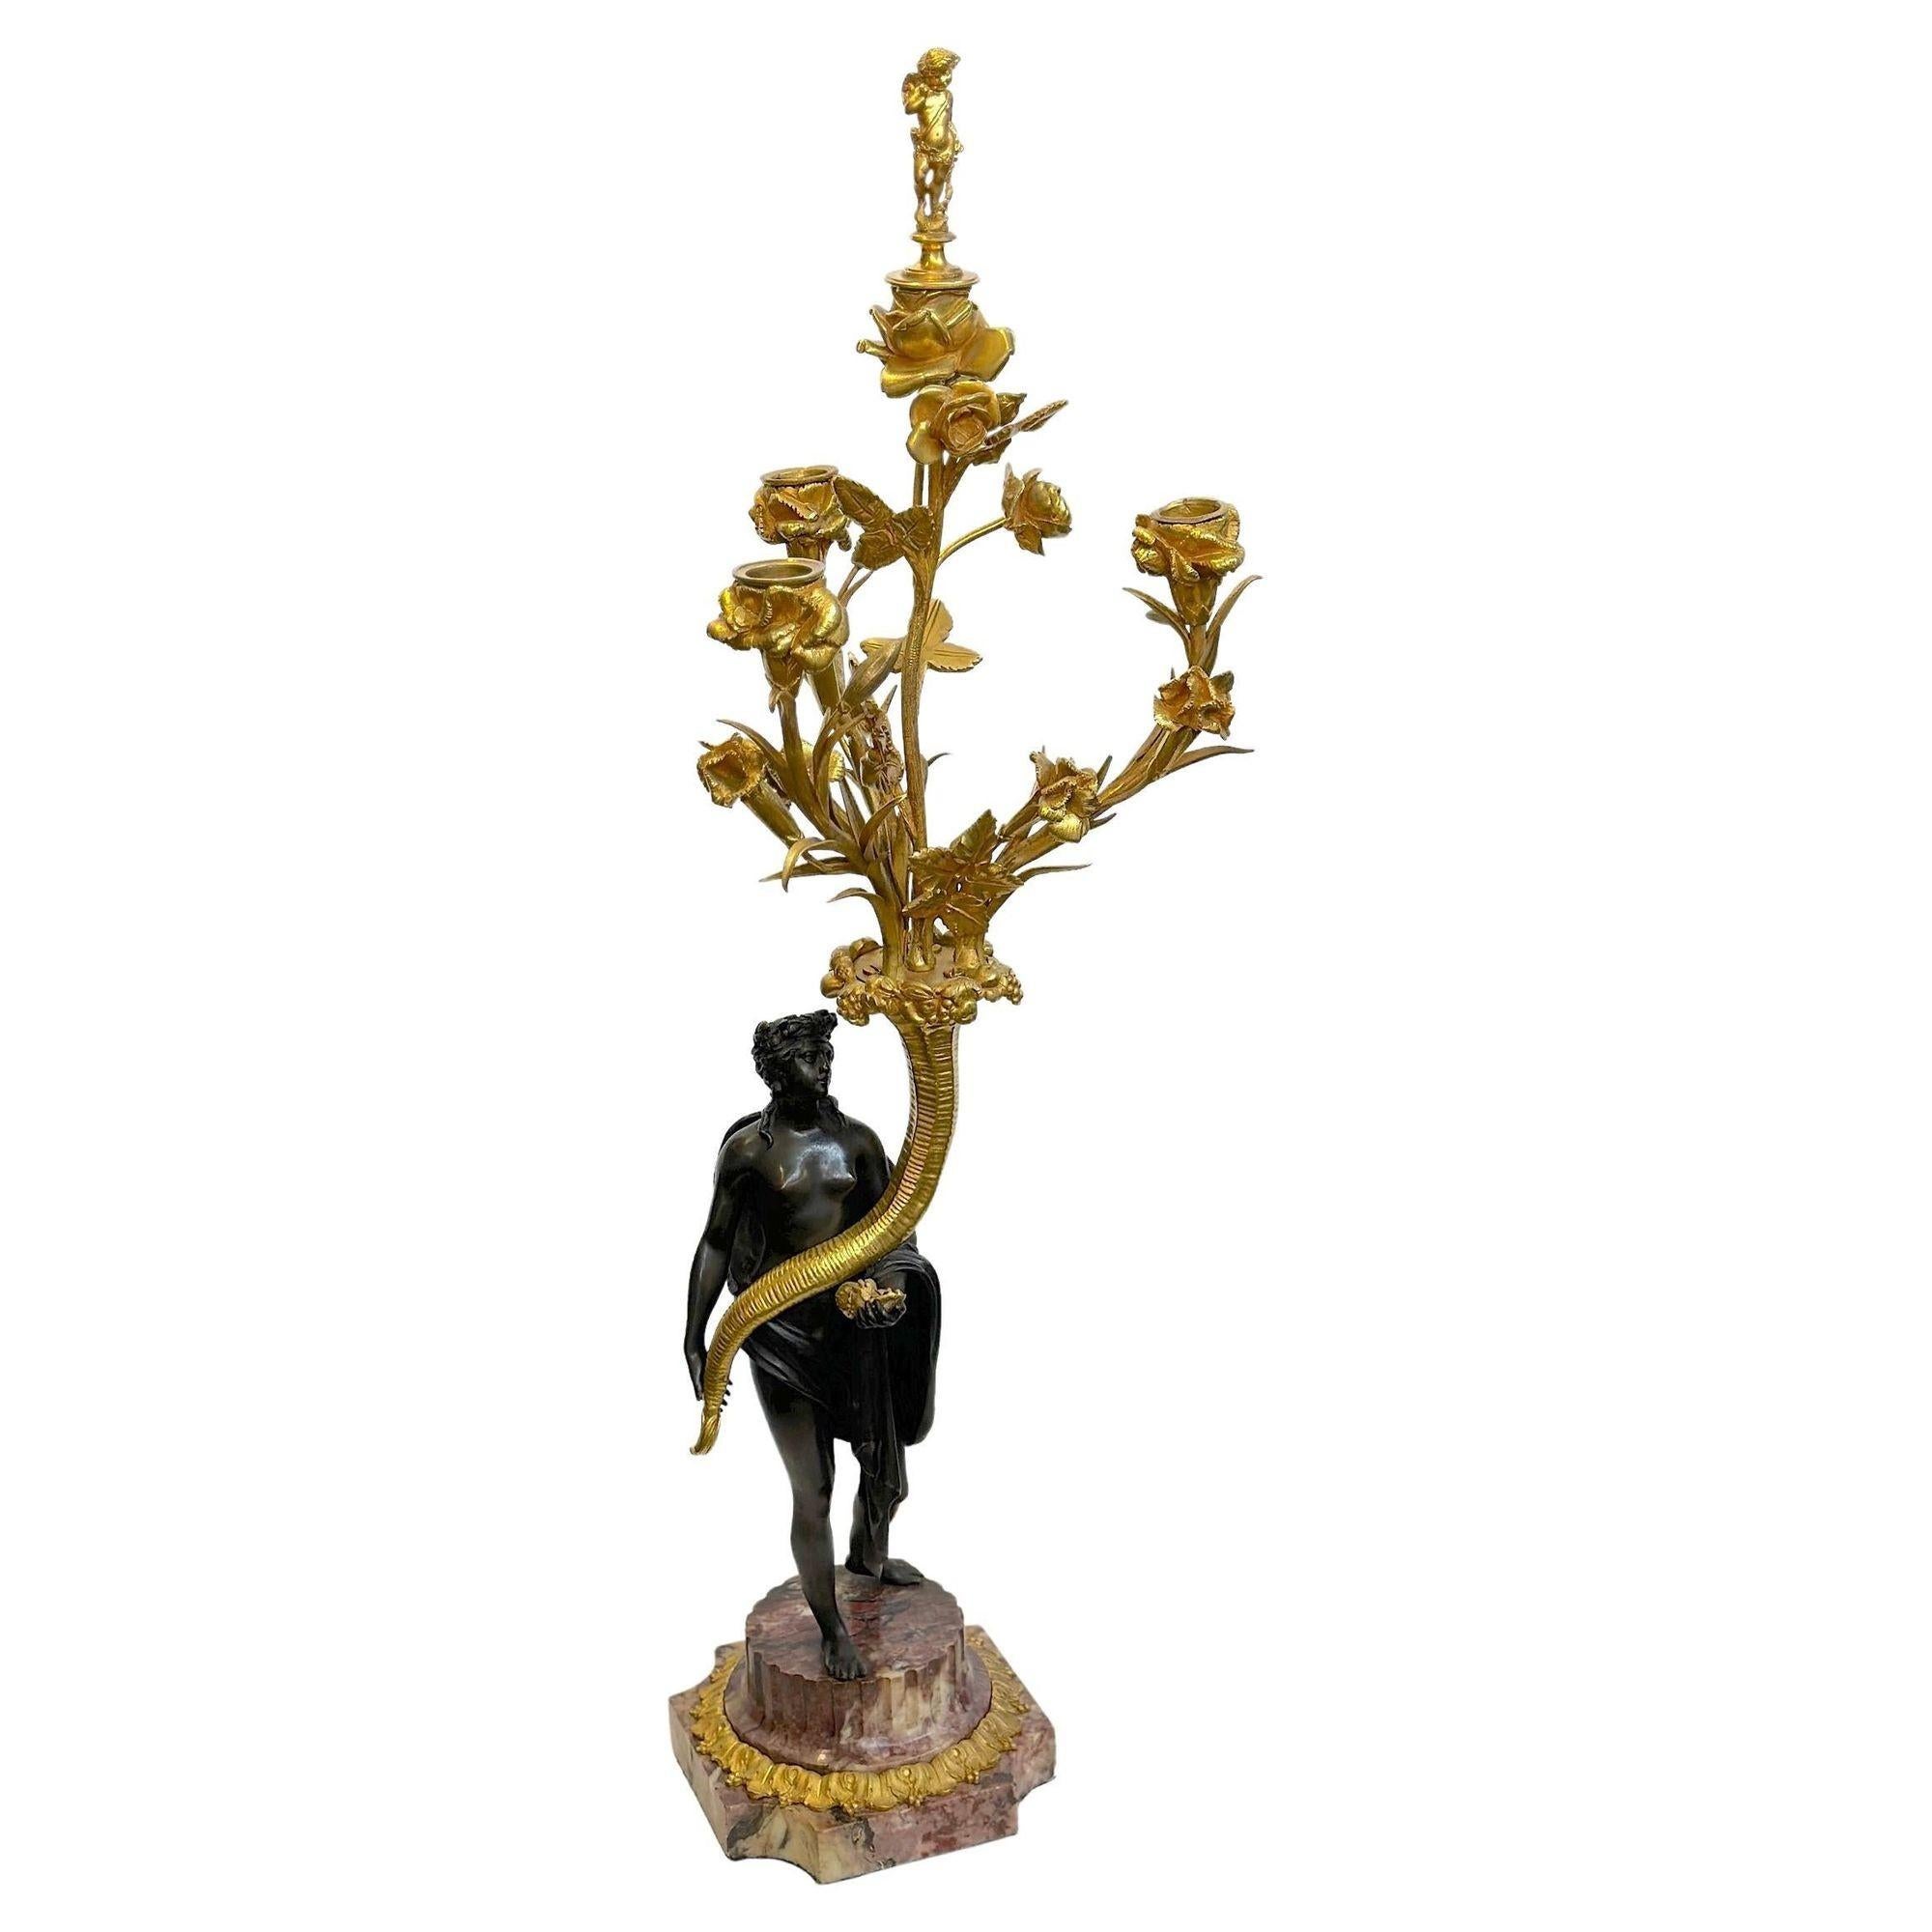 Pair of Napoleon III patinated and gilt bronze figural candelabras. Each standing on rouge royal marble bases, the figures appear to be gracefully holding a cornocupia full of flowered branches. Each candelabra also includes a detachable finial on